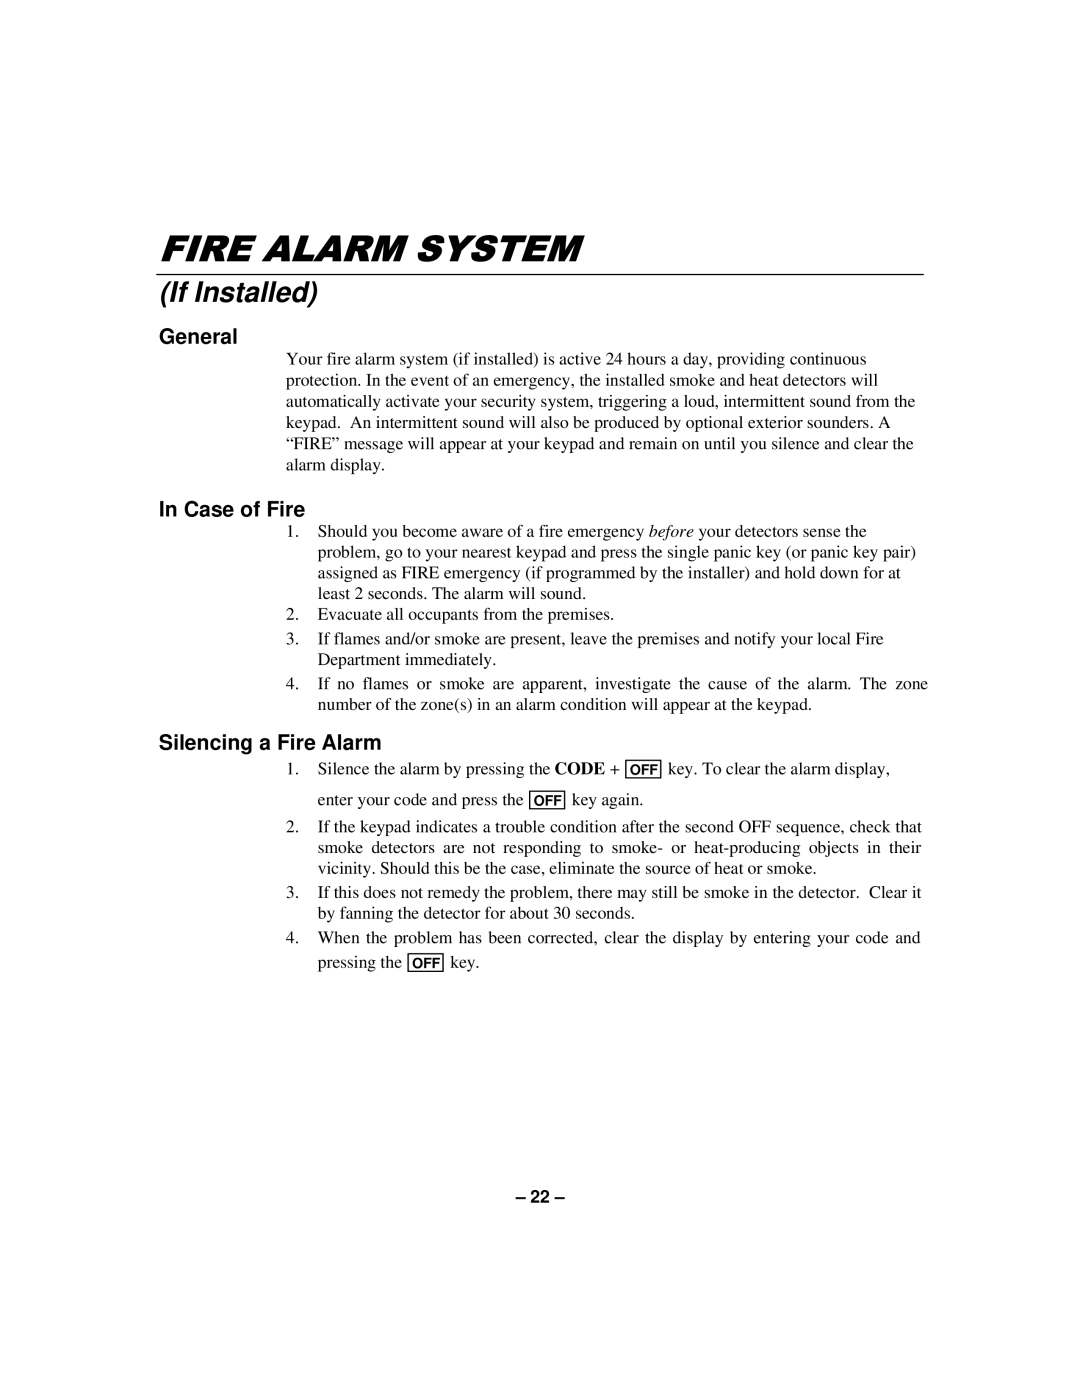 First Alert N8891-1 manual 5$/$506, If Installed, In Case of Fire, Silencing a Fire Alarm, General 